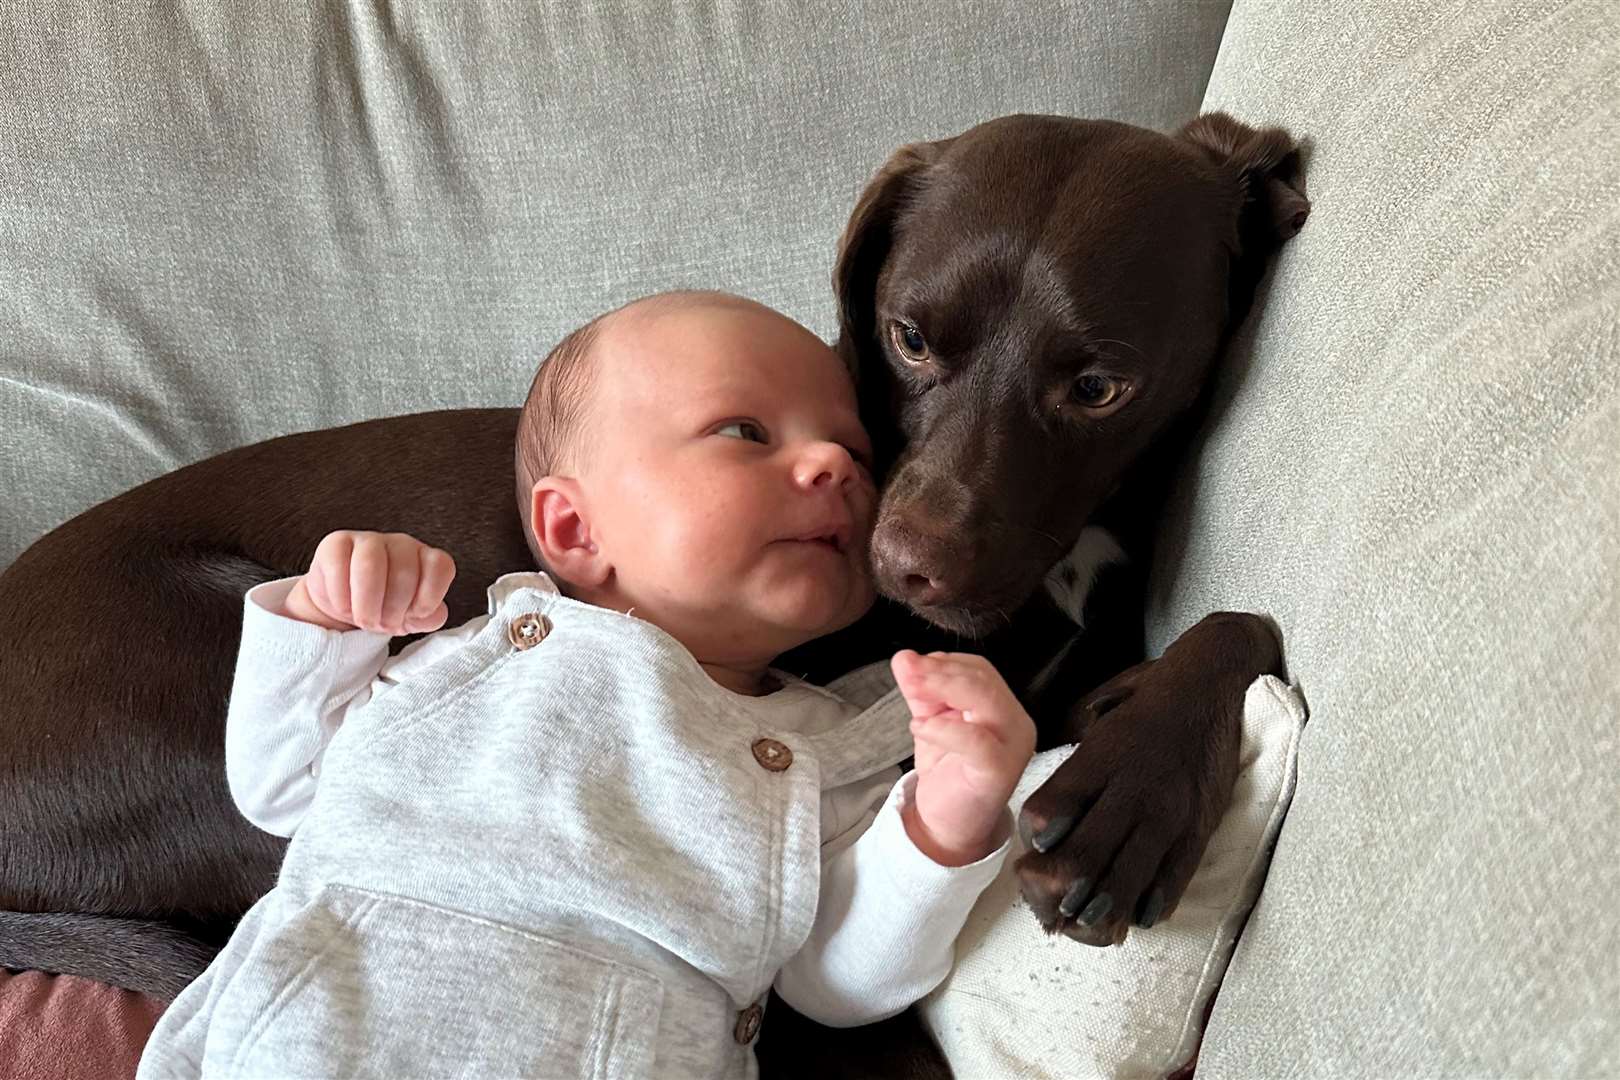 Gus and baby Brody. Picture: SWNS